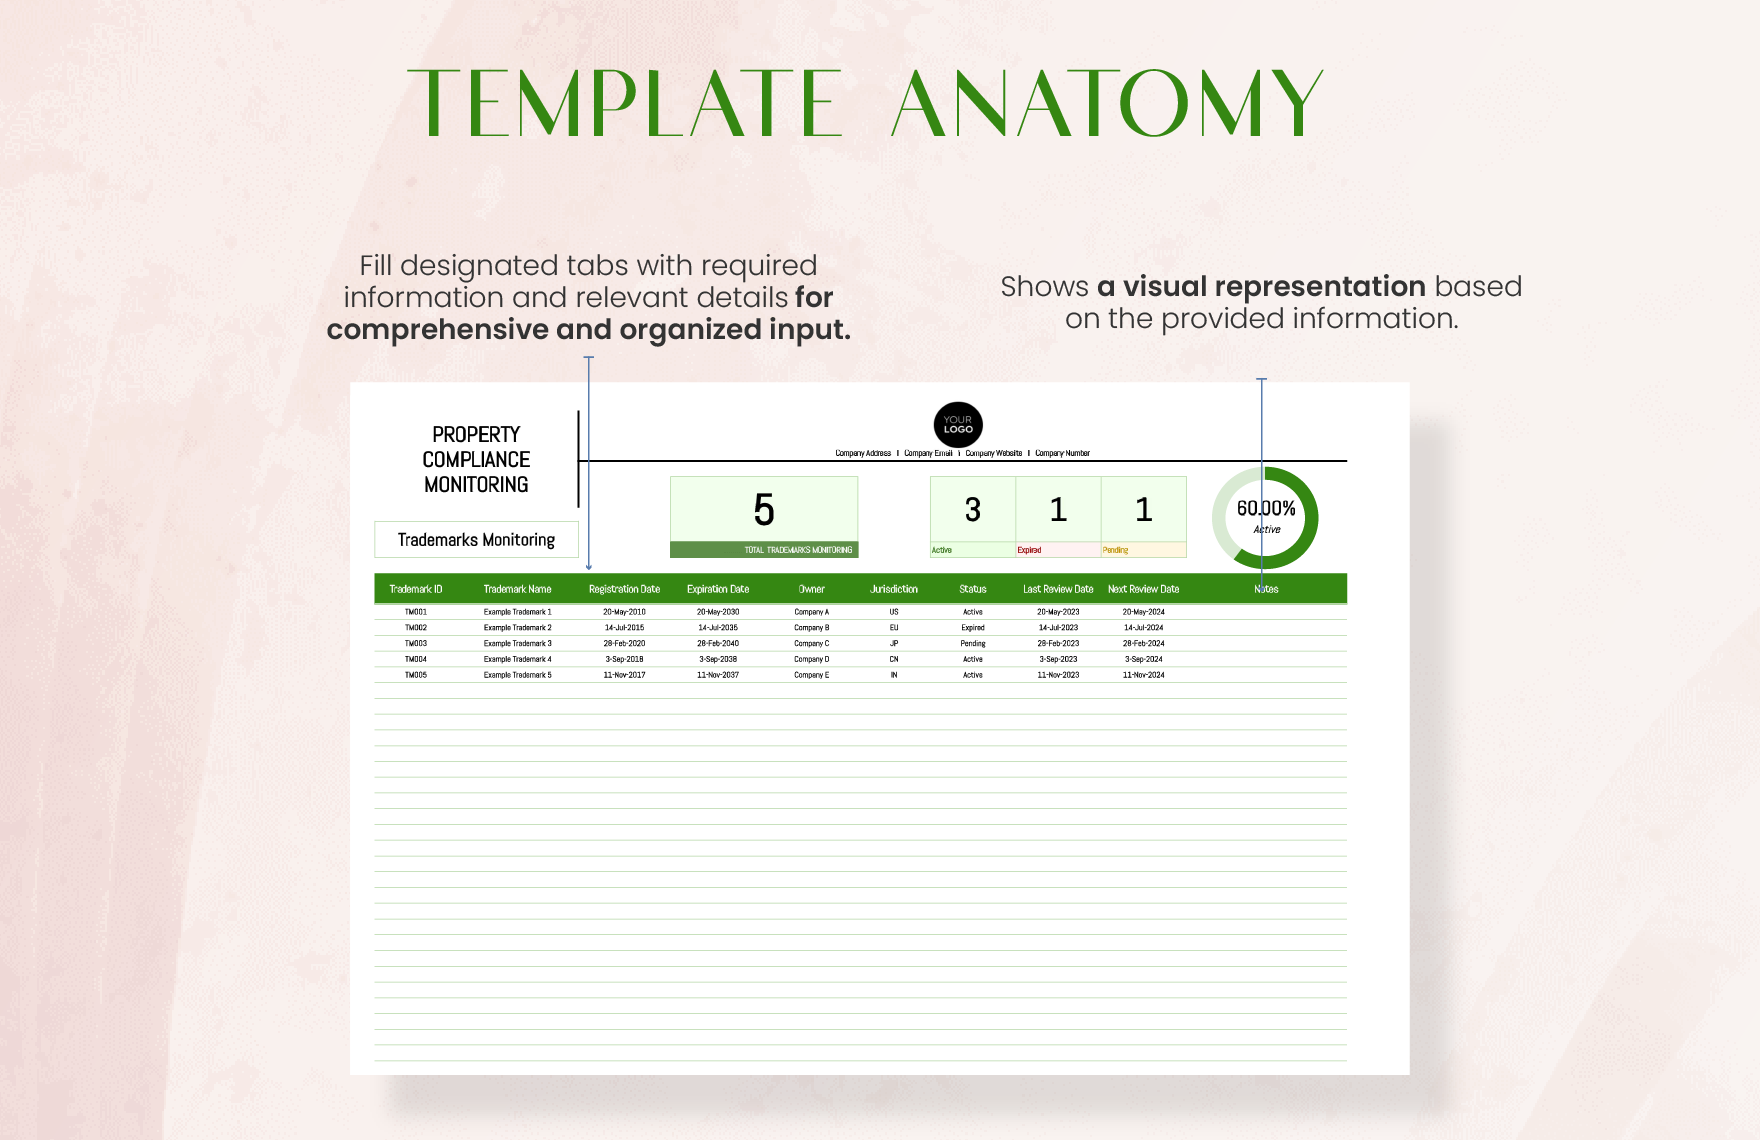 Legal Intellectual Property Compliance Monitoring Template